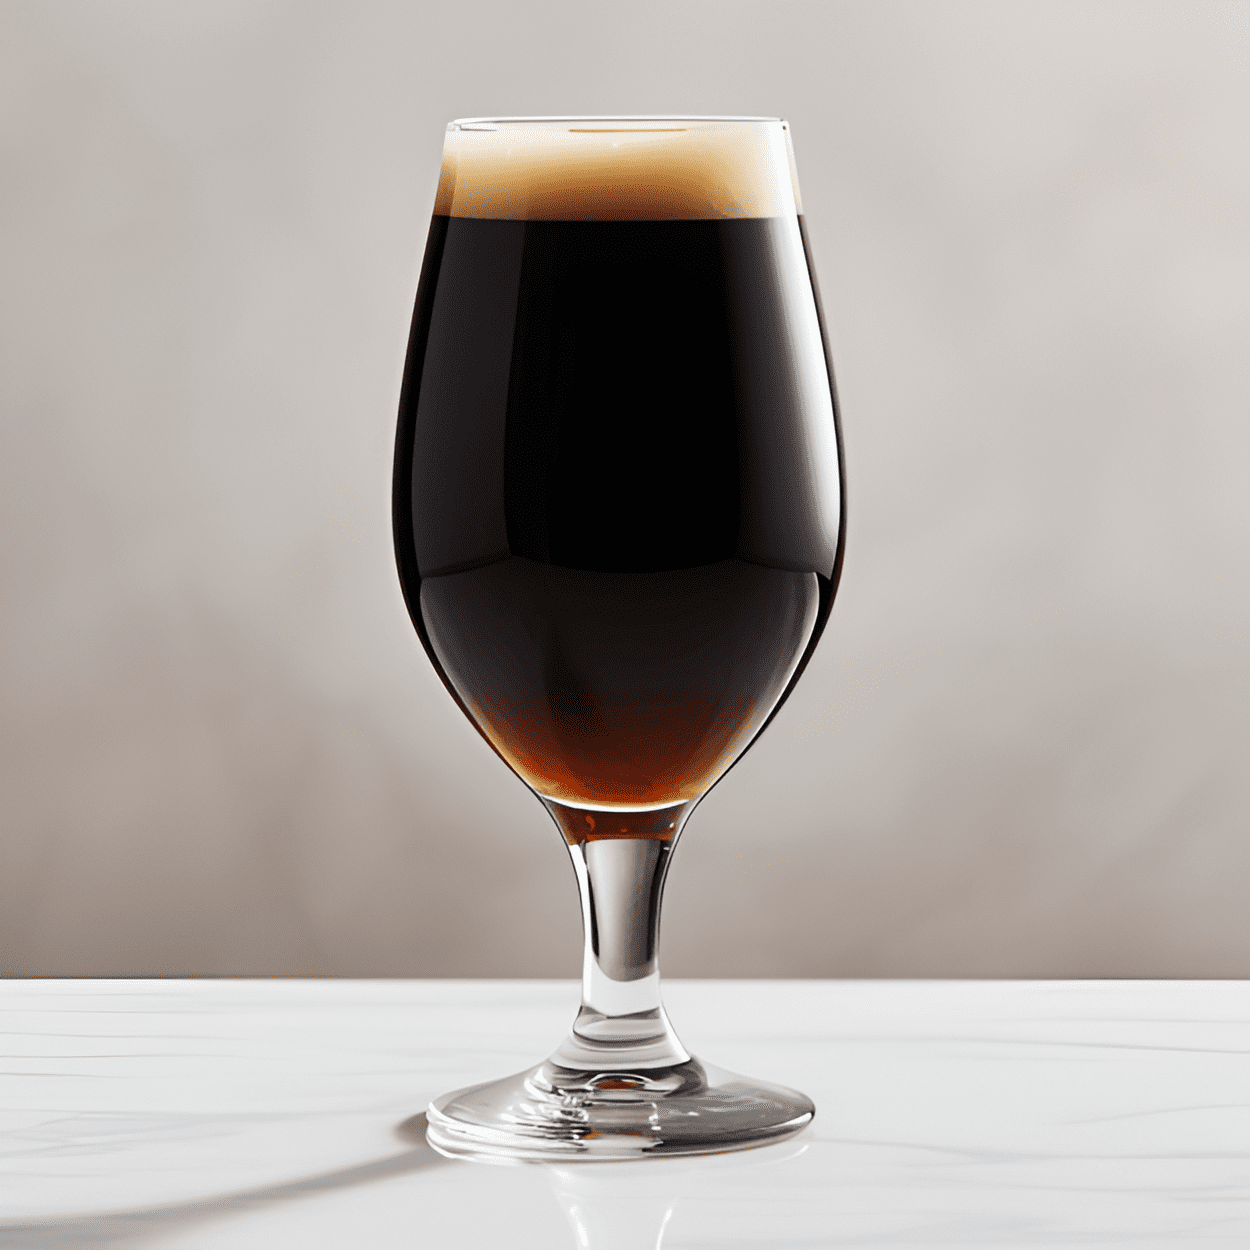 Black And Tan Cocktail Recipe - The Black And Tan cocktail is a delightful mix of flavors. The stout brings a rich, creamy, and slightly bitter taste, while the ale adds a crisp, refreshing, and slightly sweet note. The result is a balanced, full-bodied drink with a smooth finish.